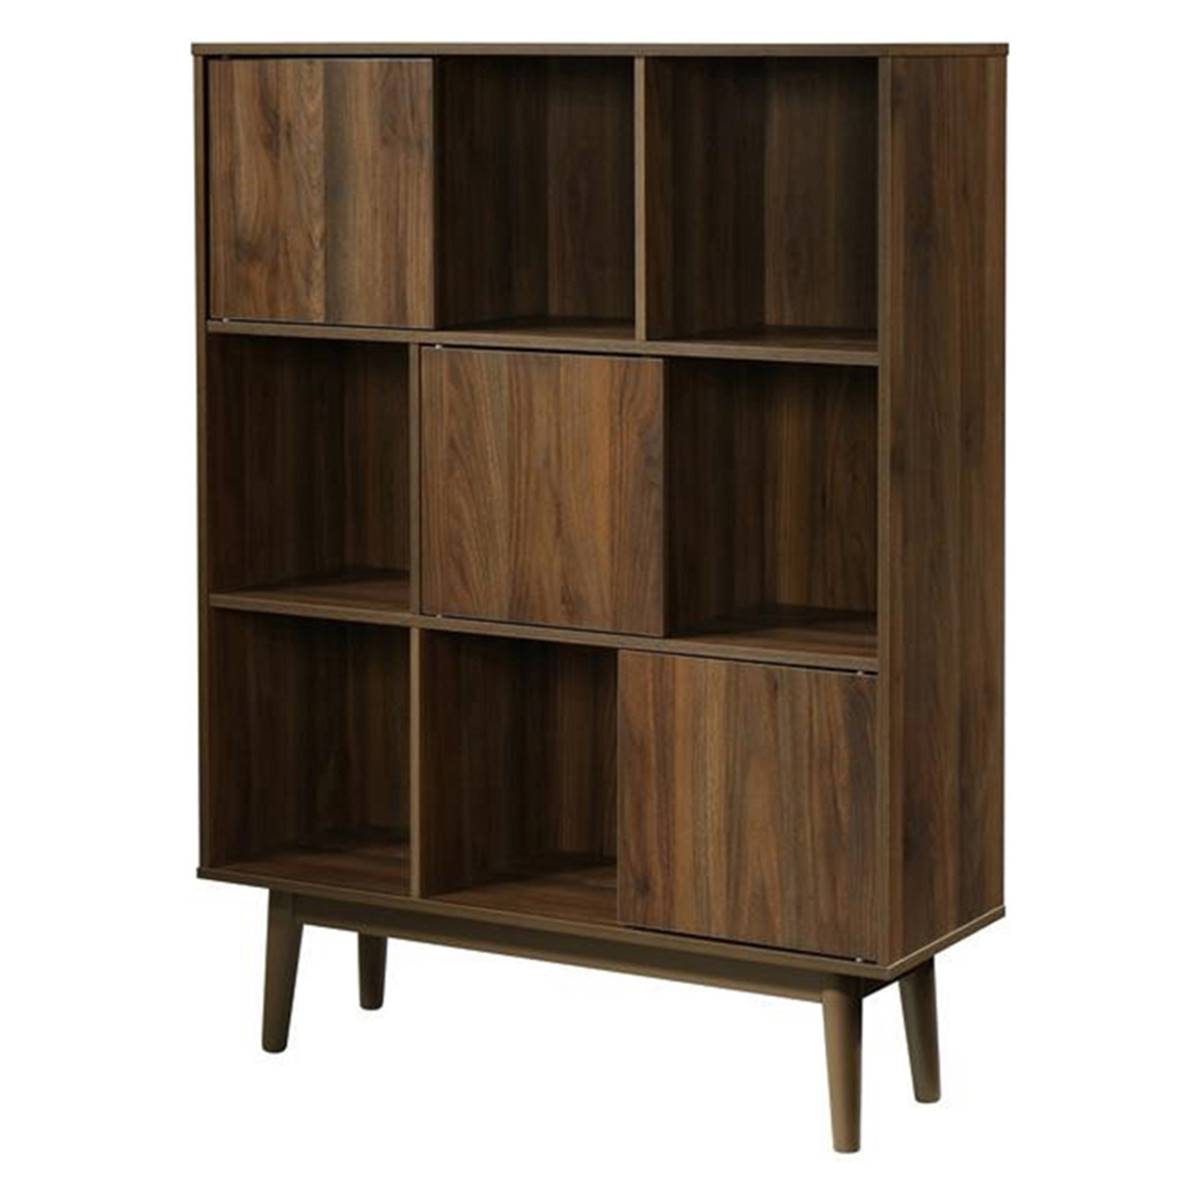 4D Concepts Montage Midcentury Room Bookcase